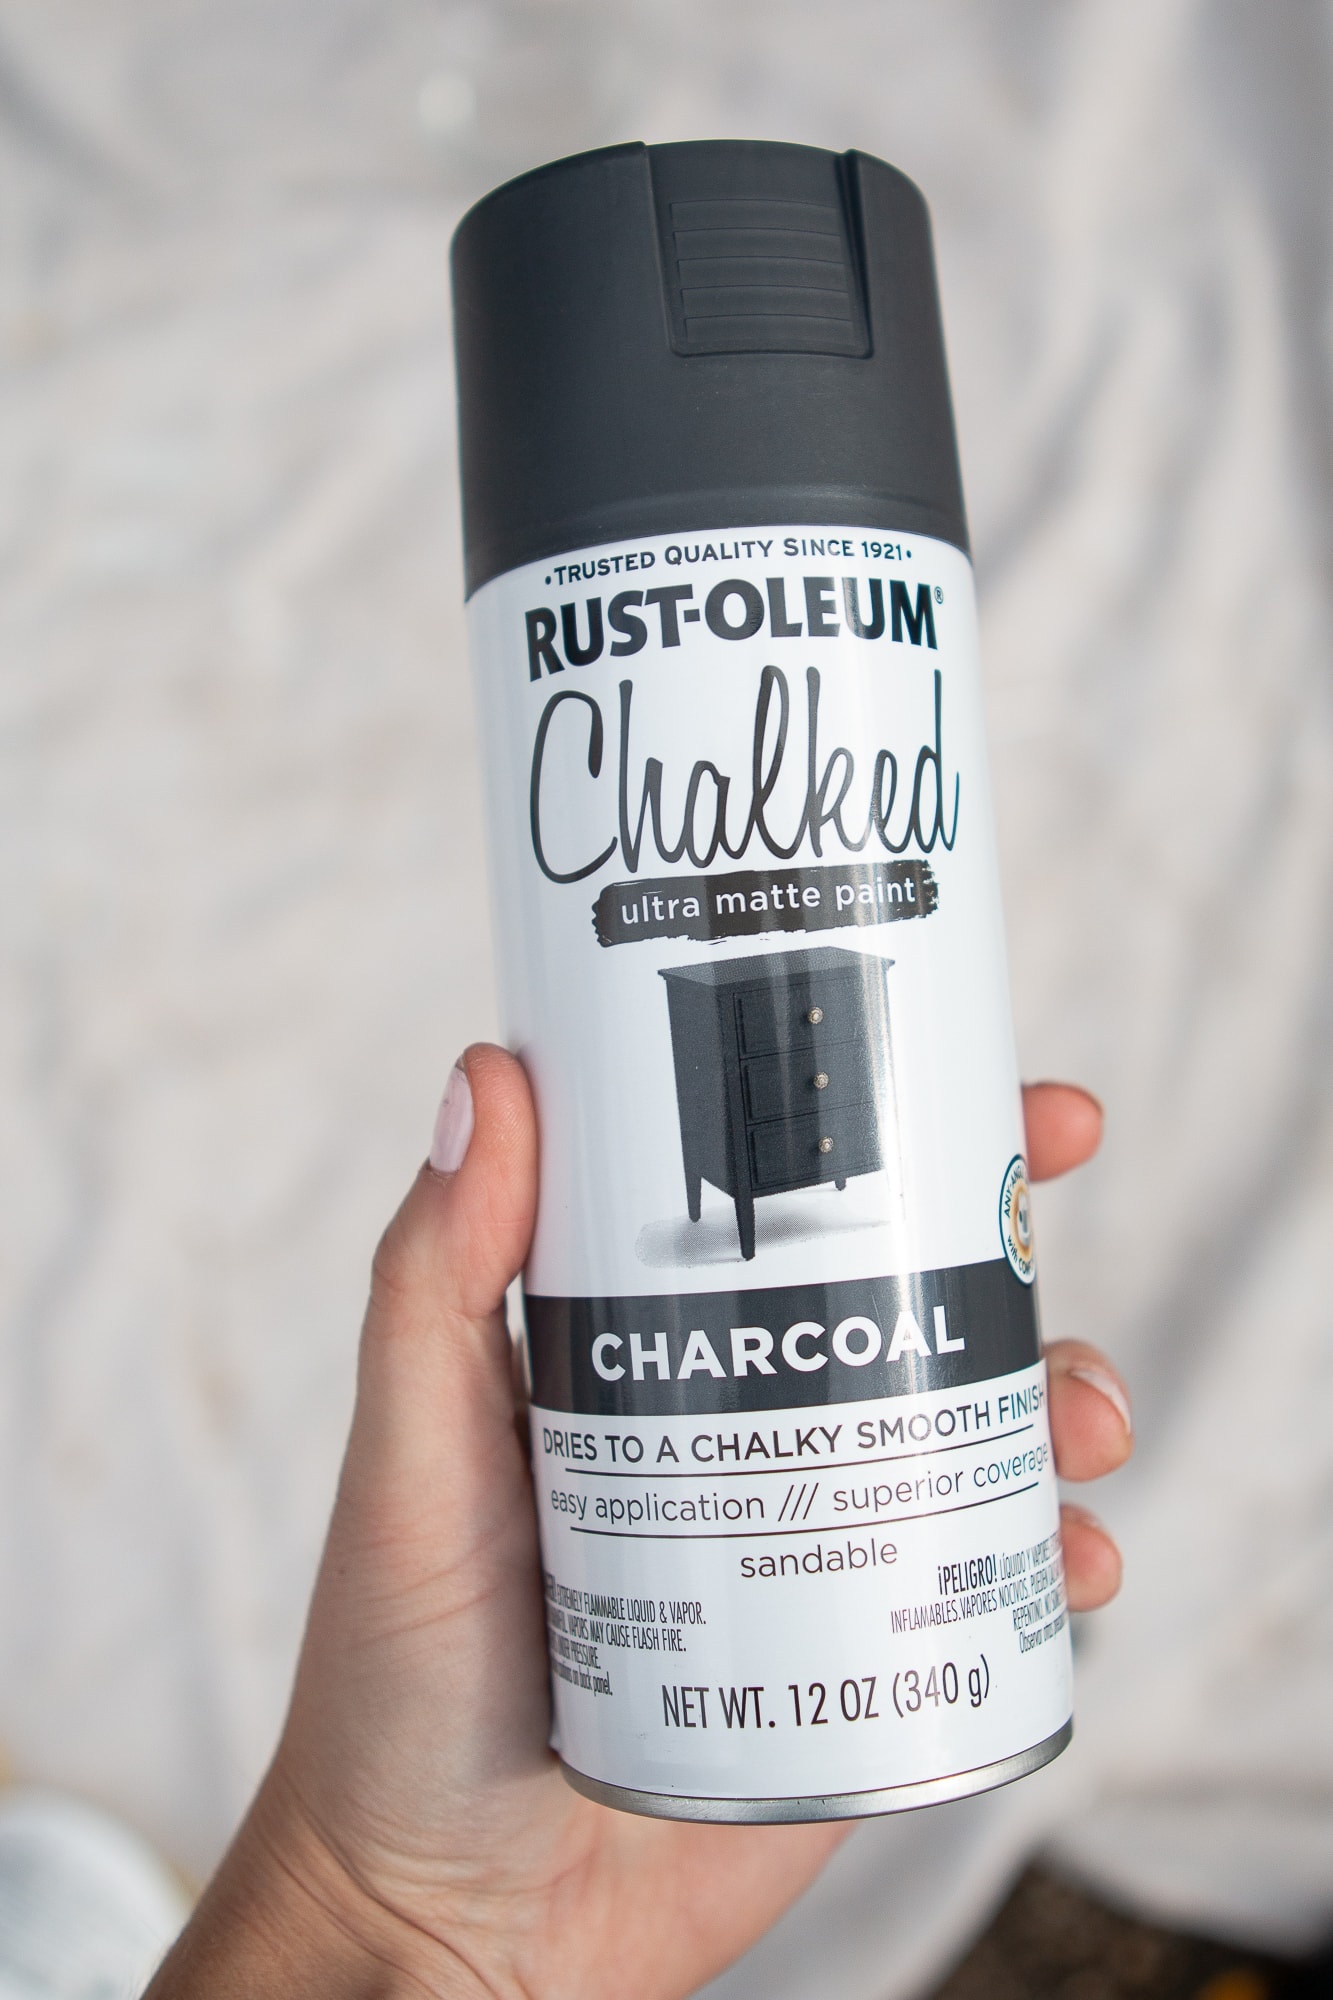 Charcoal spray paint